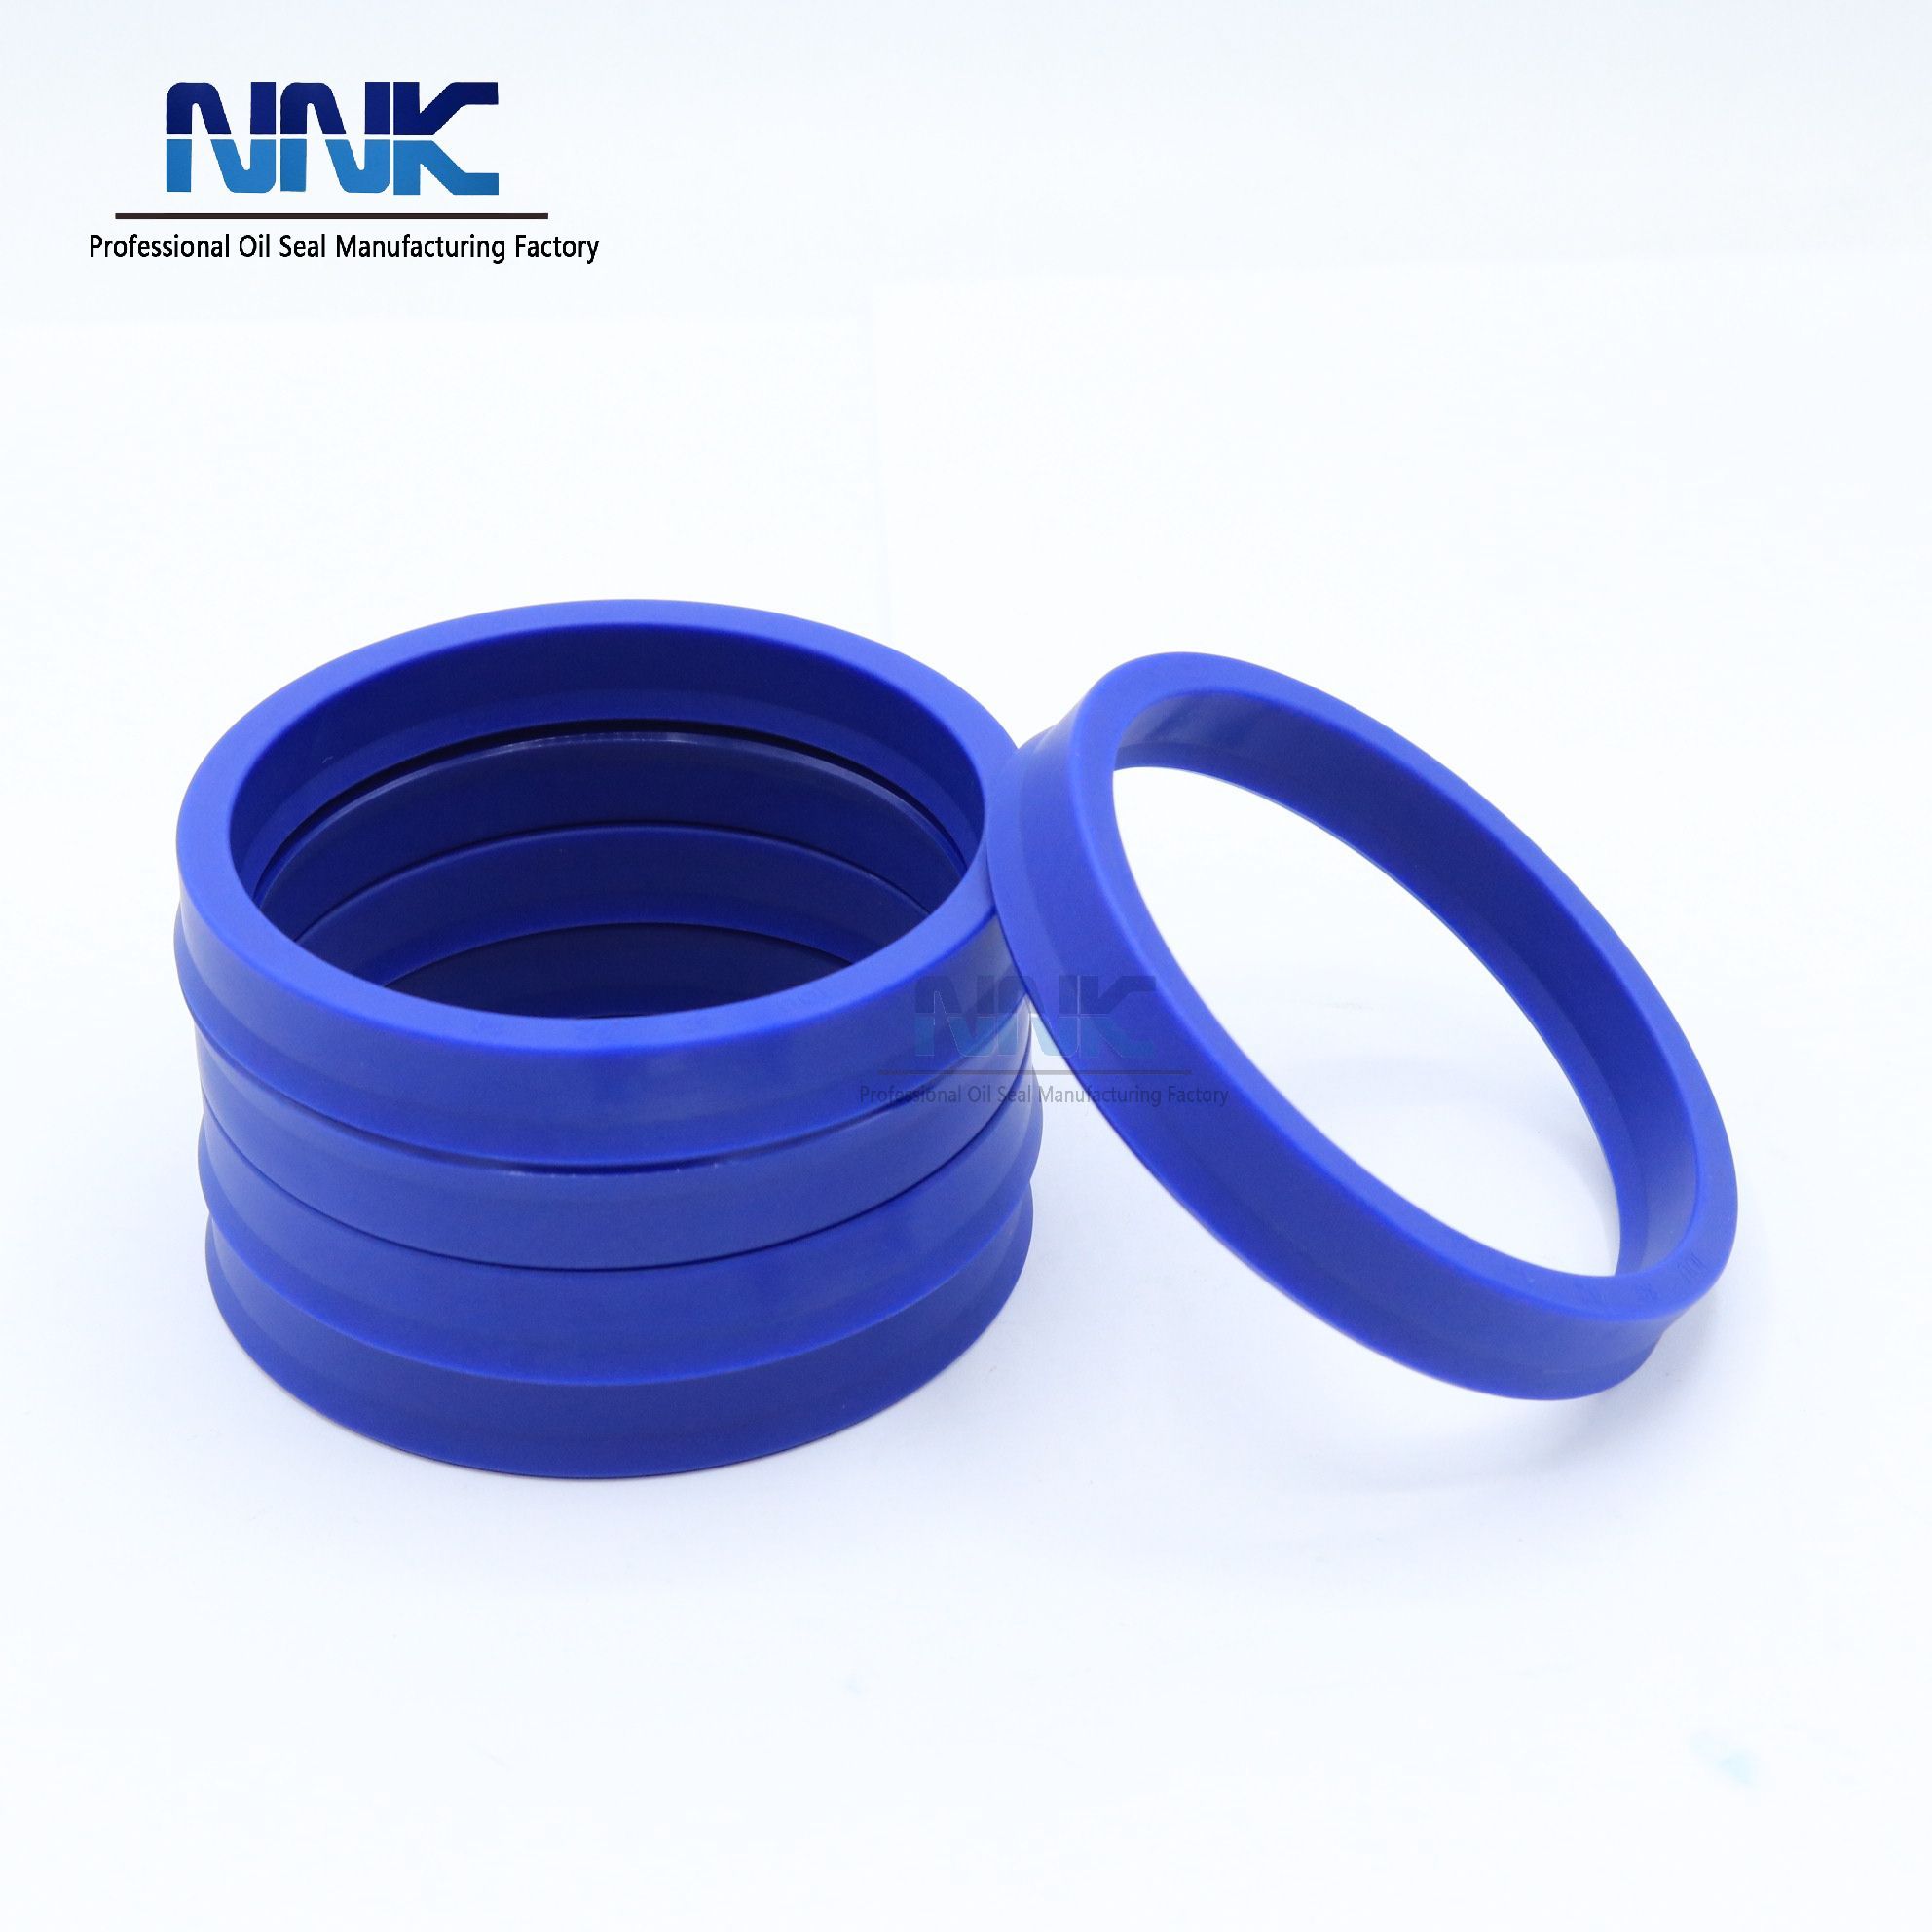 Specialist In all kind of Hydraulic Seal, Oil Seal, O-Ring & Mechanical Seal  Supply